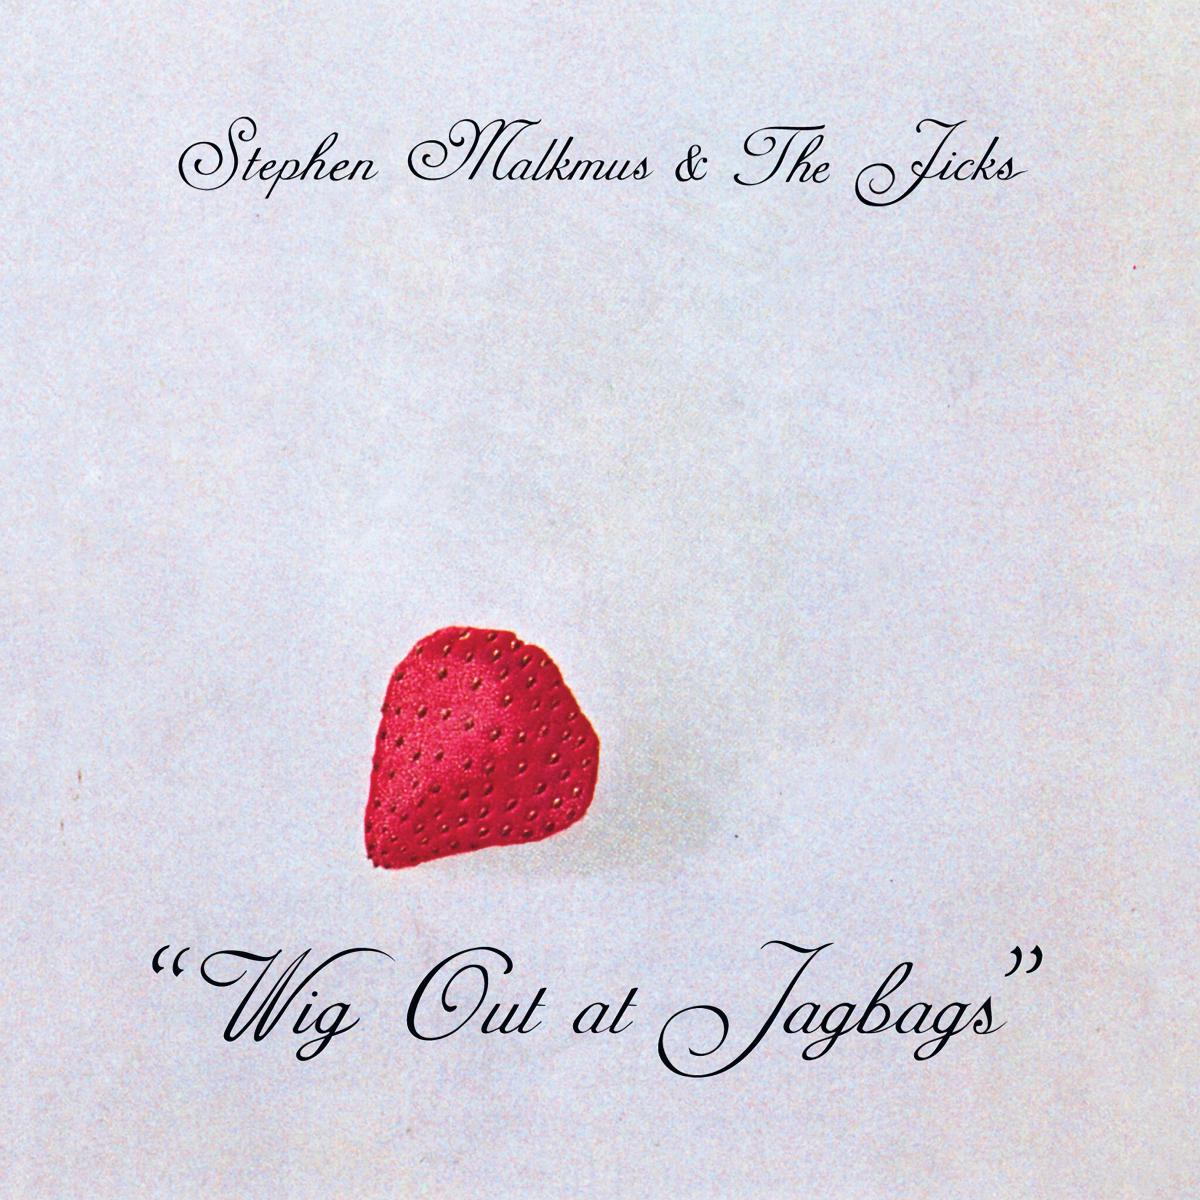 Malkmus, Stephen & The Jicks - Wig Out at Jagbags (Digital Download Code) - 744861105015 - LP's - Yellow Racket Records